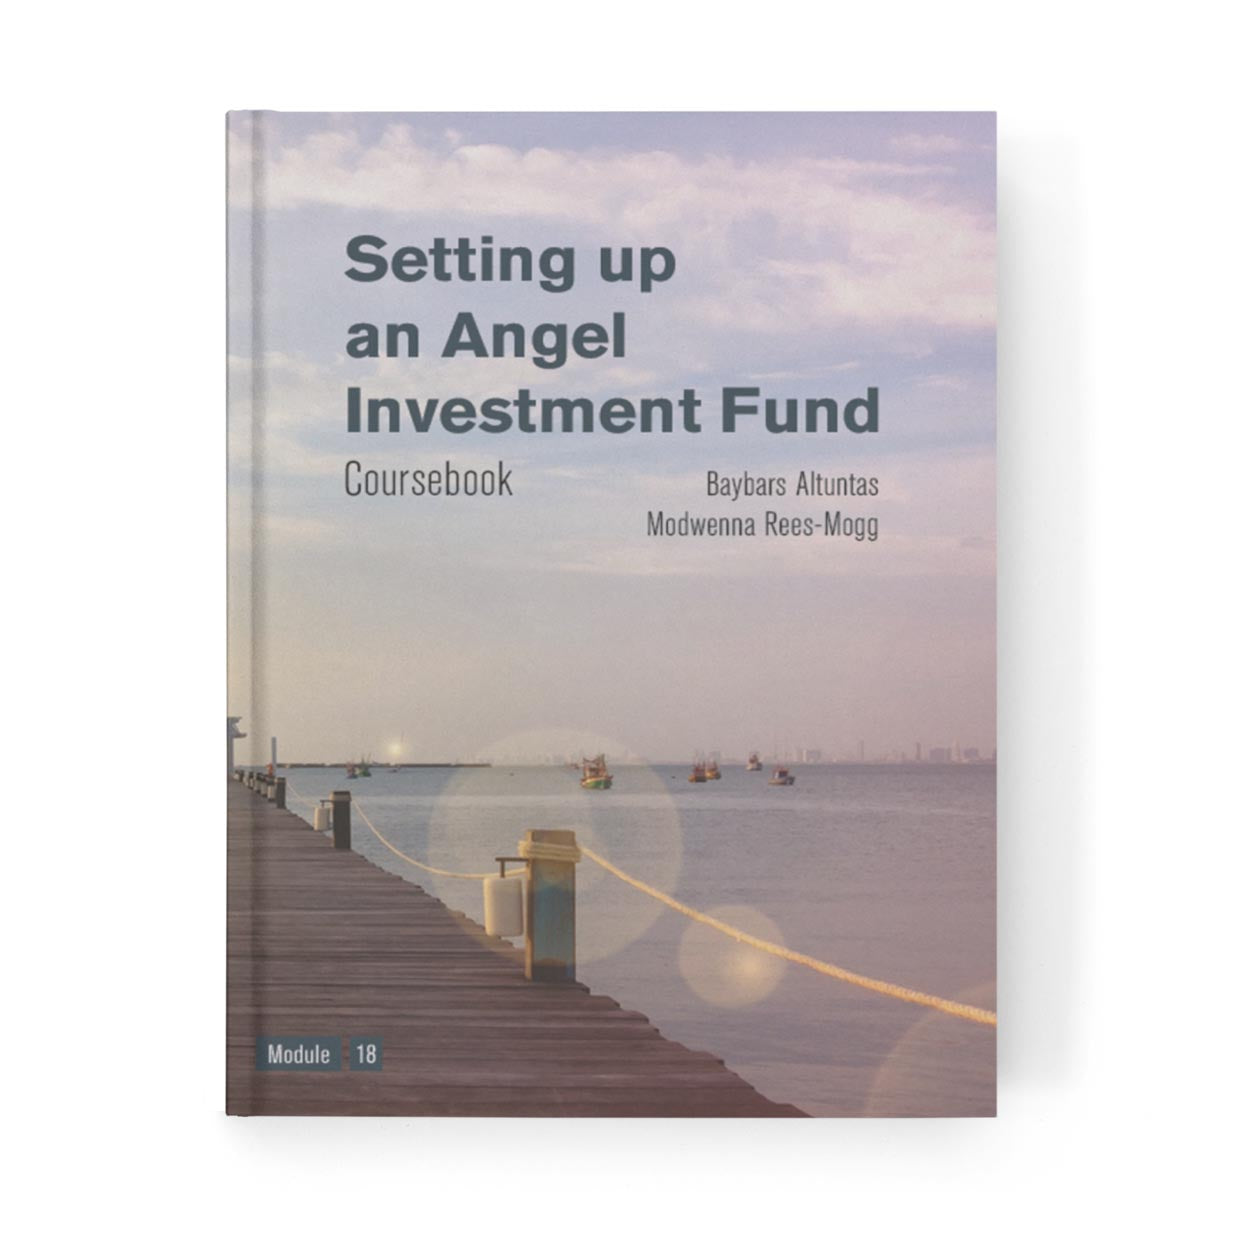 Setting up an Angel Investment Fund Coursebook